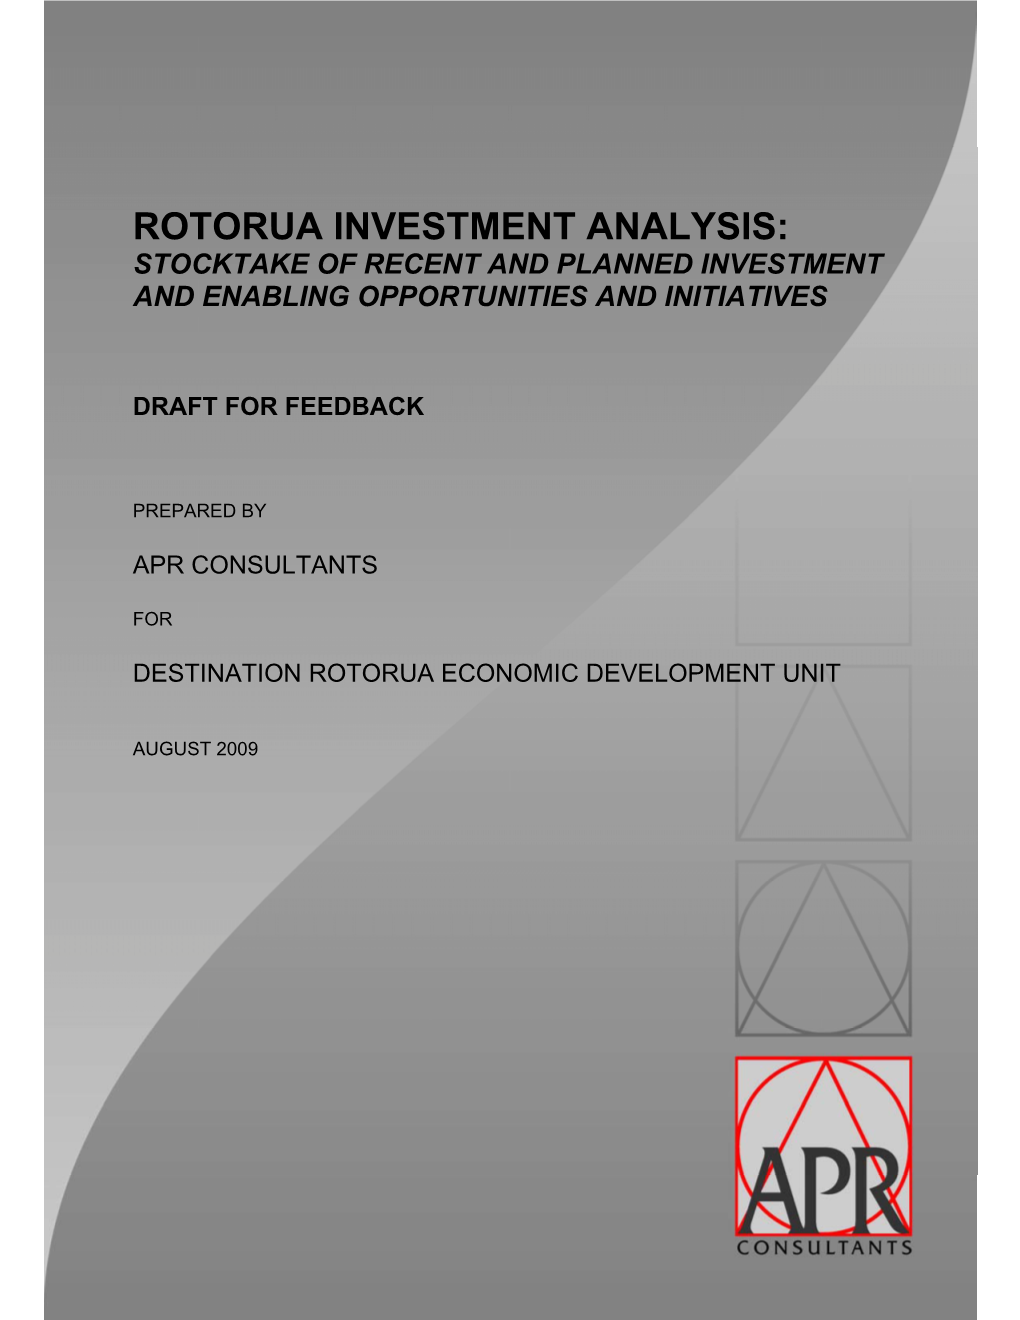 Rotorua Investment Analysis: Stocktake of Recent and Planned Investment and Enabling Opportunities and Initiatives